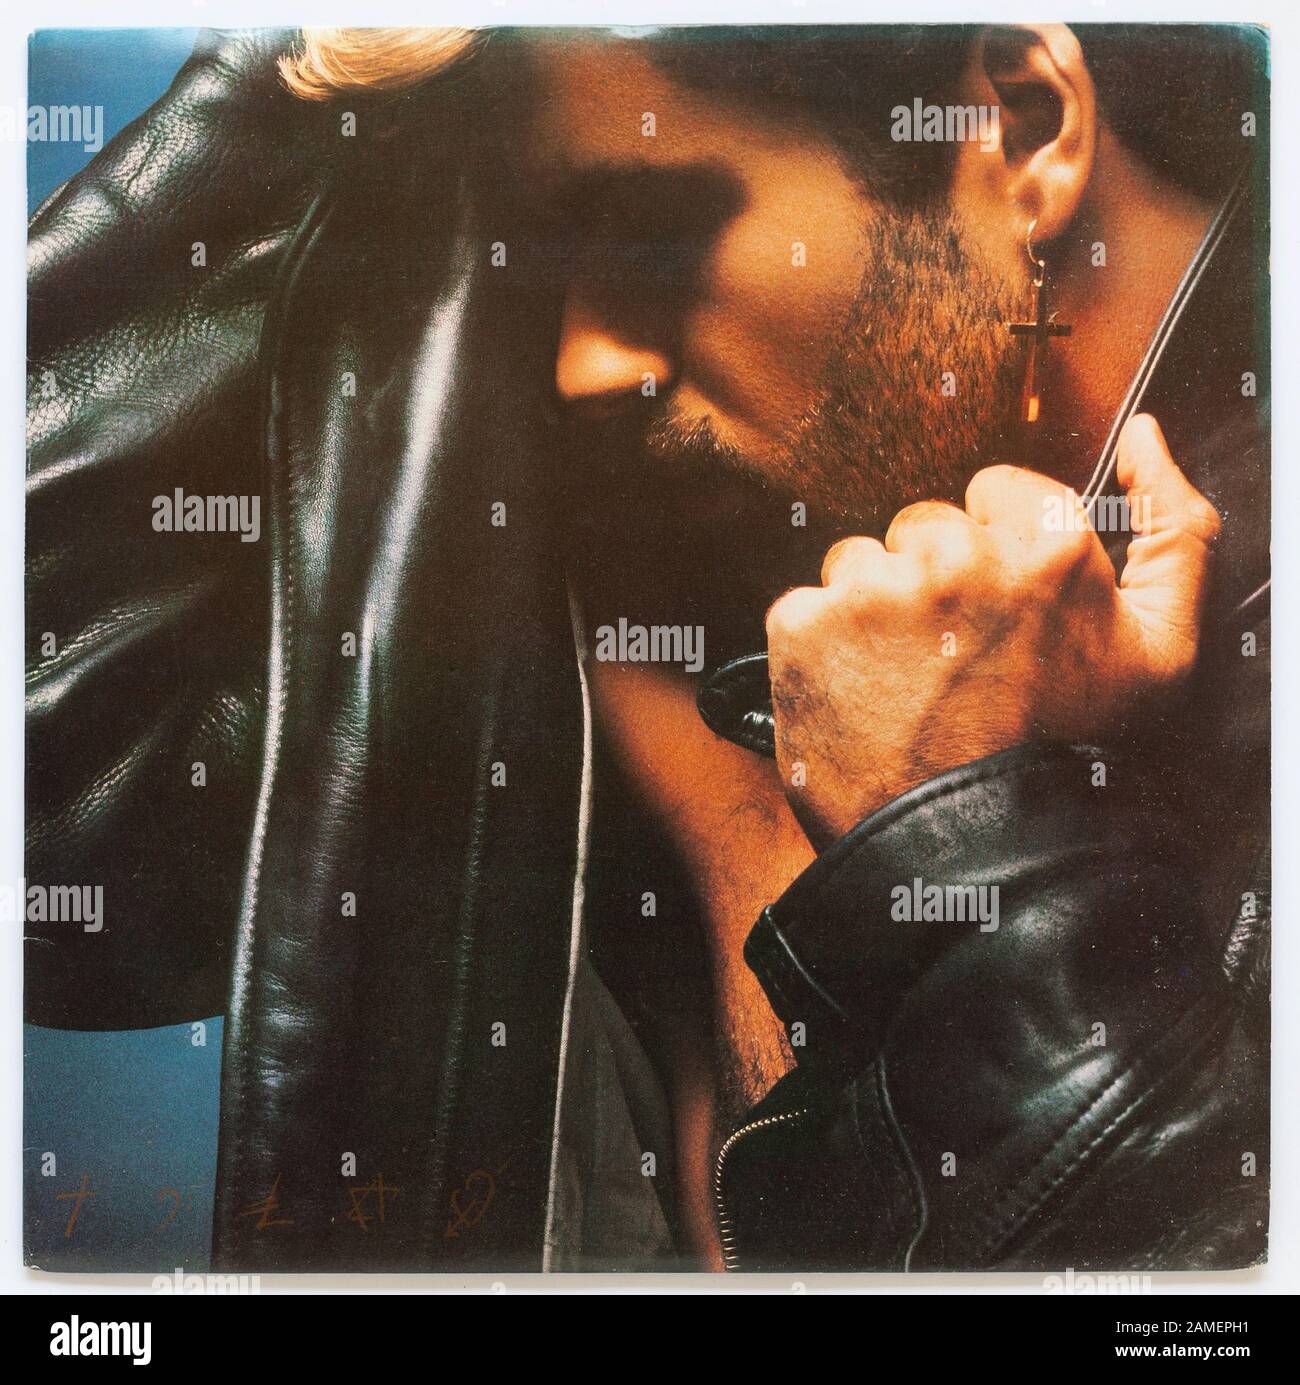 The cover of Faith, 1987 album by George Michael on Colombia Epic - Editorial use only Stock Photo